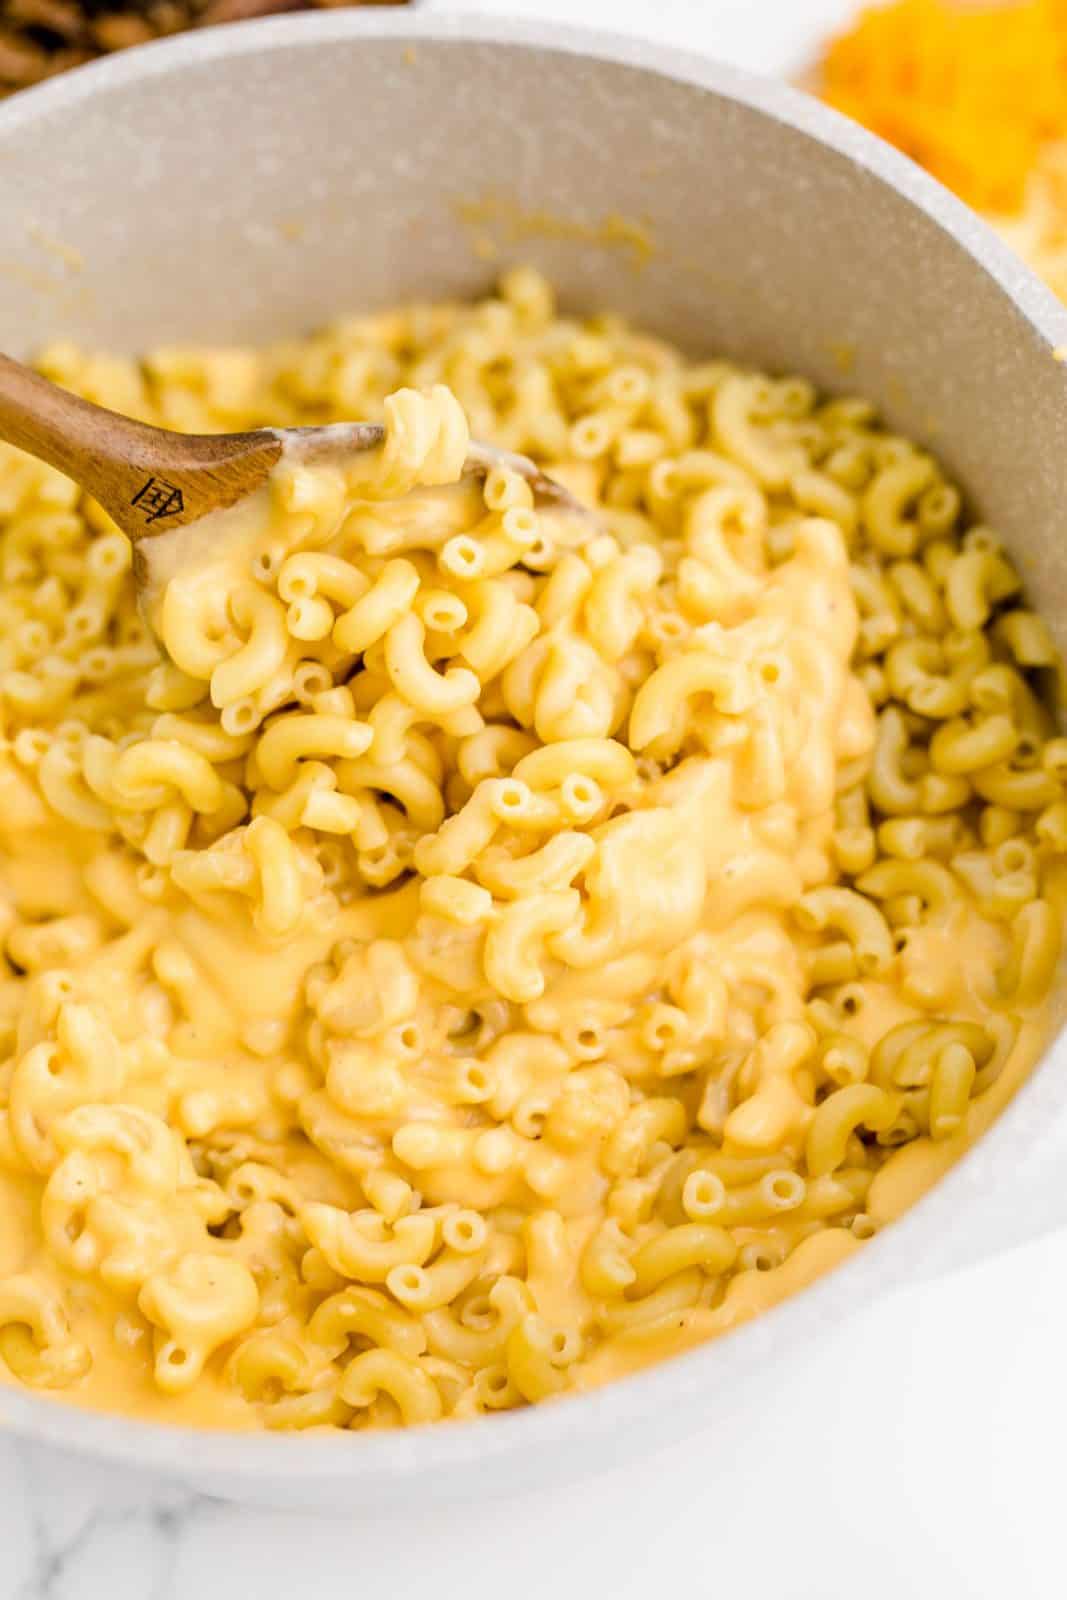 Macaroni added to cheese mixture and being stirred together with a wooden spoon.